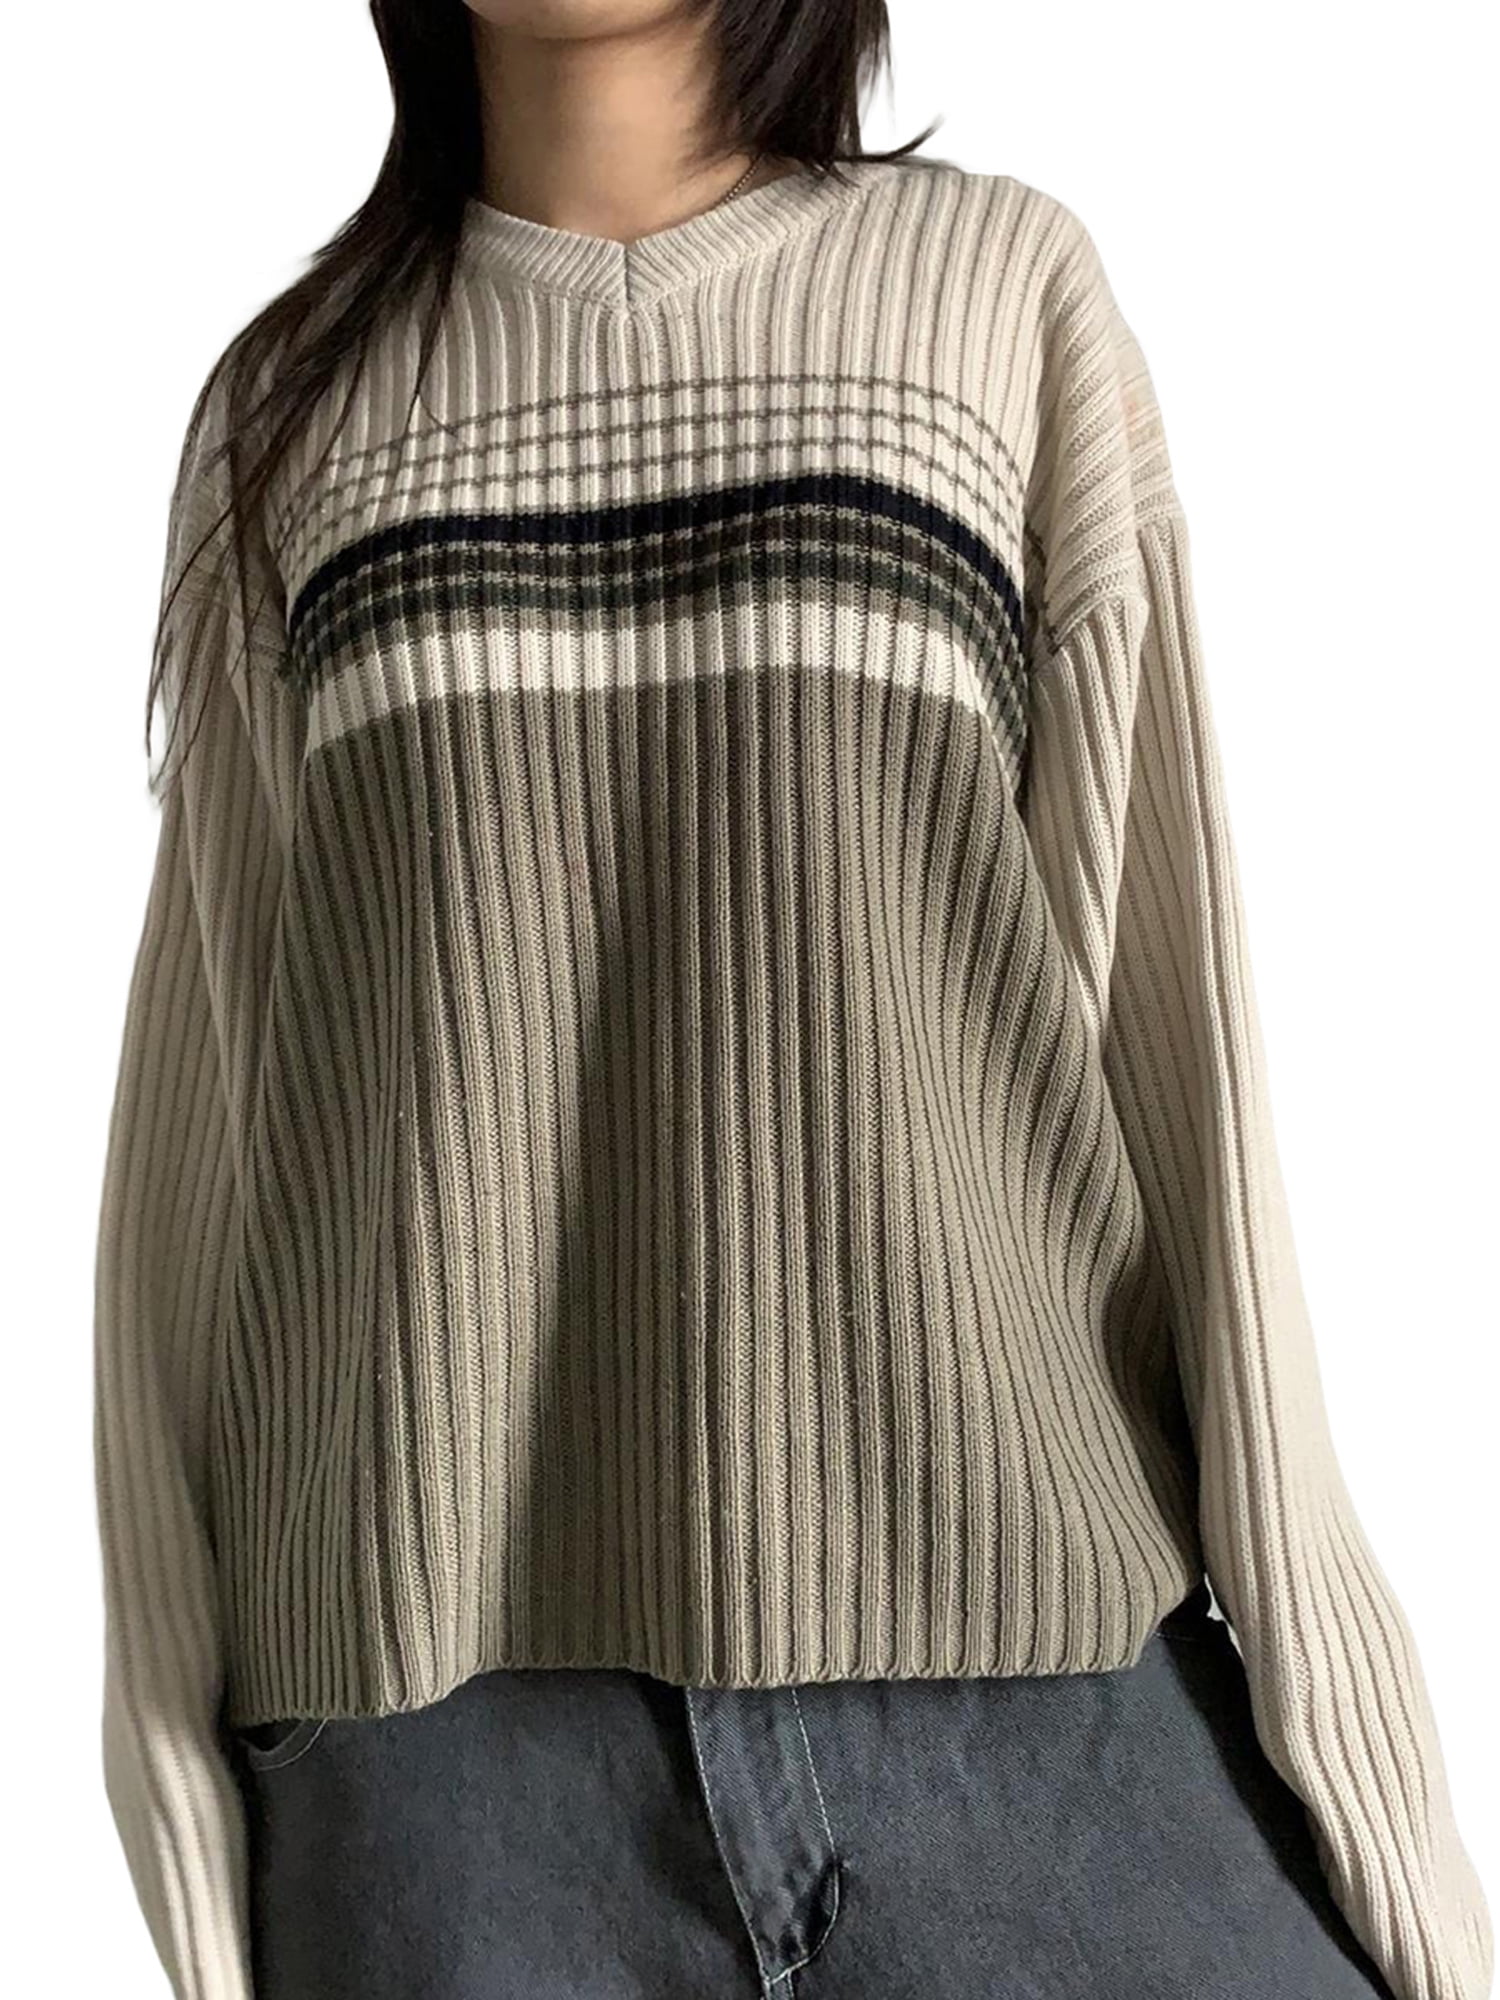 Qiylii Women V-Neck Sweater Stripe Contrast Color Long Sleeve Loose Knitted Tops  Autumn Winter Casual Pullovers Tops 